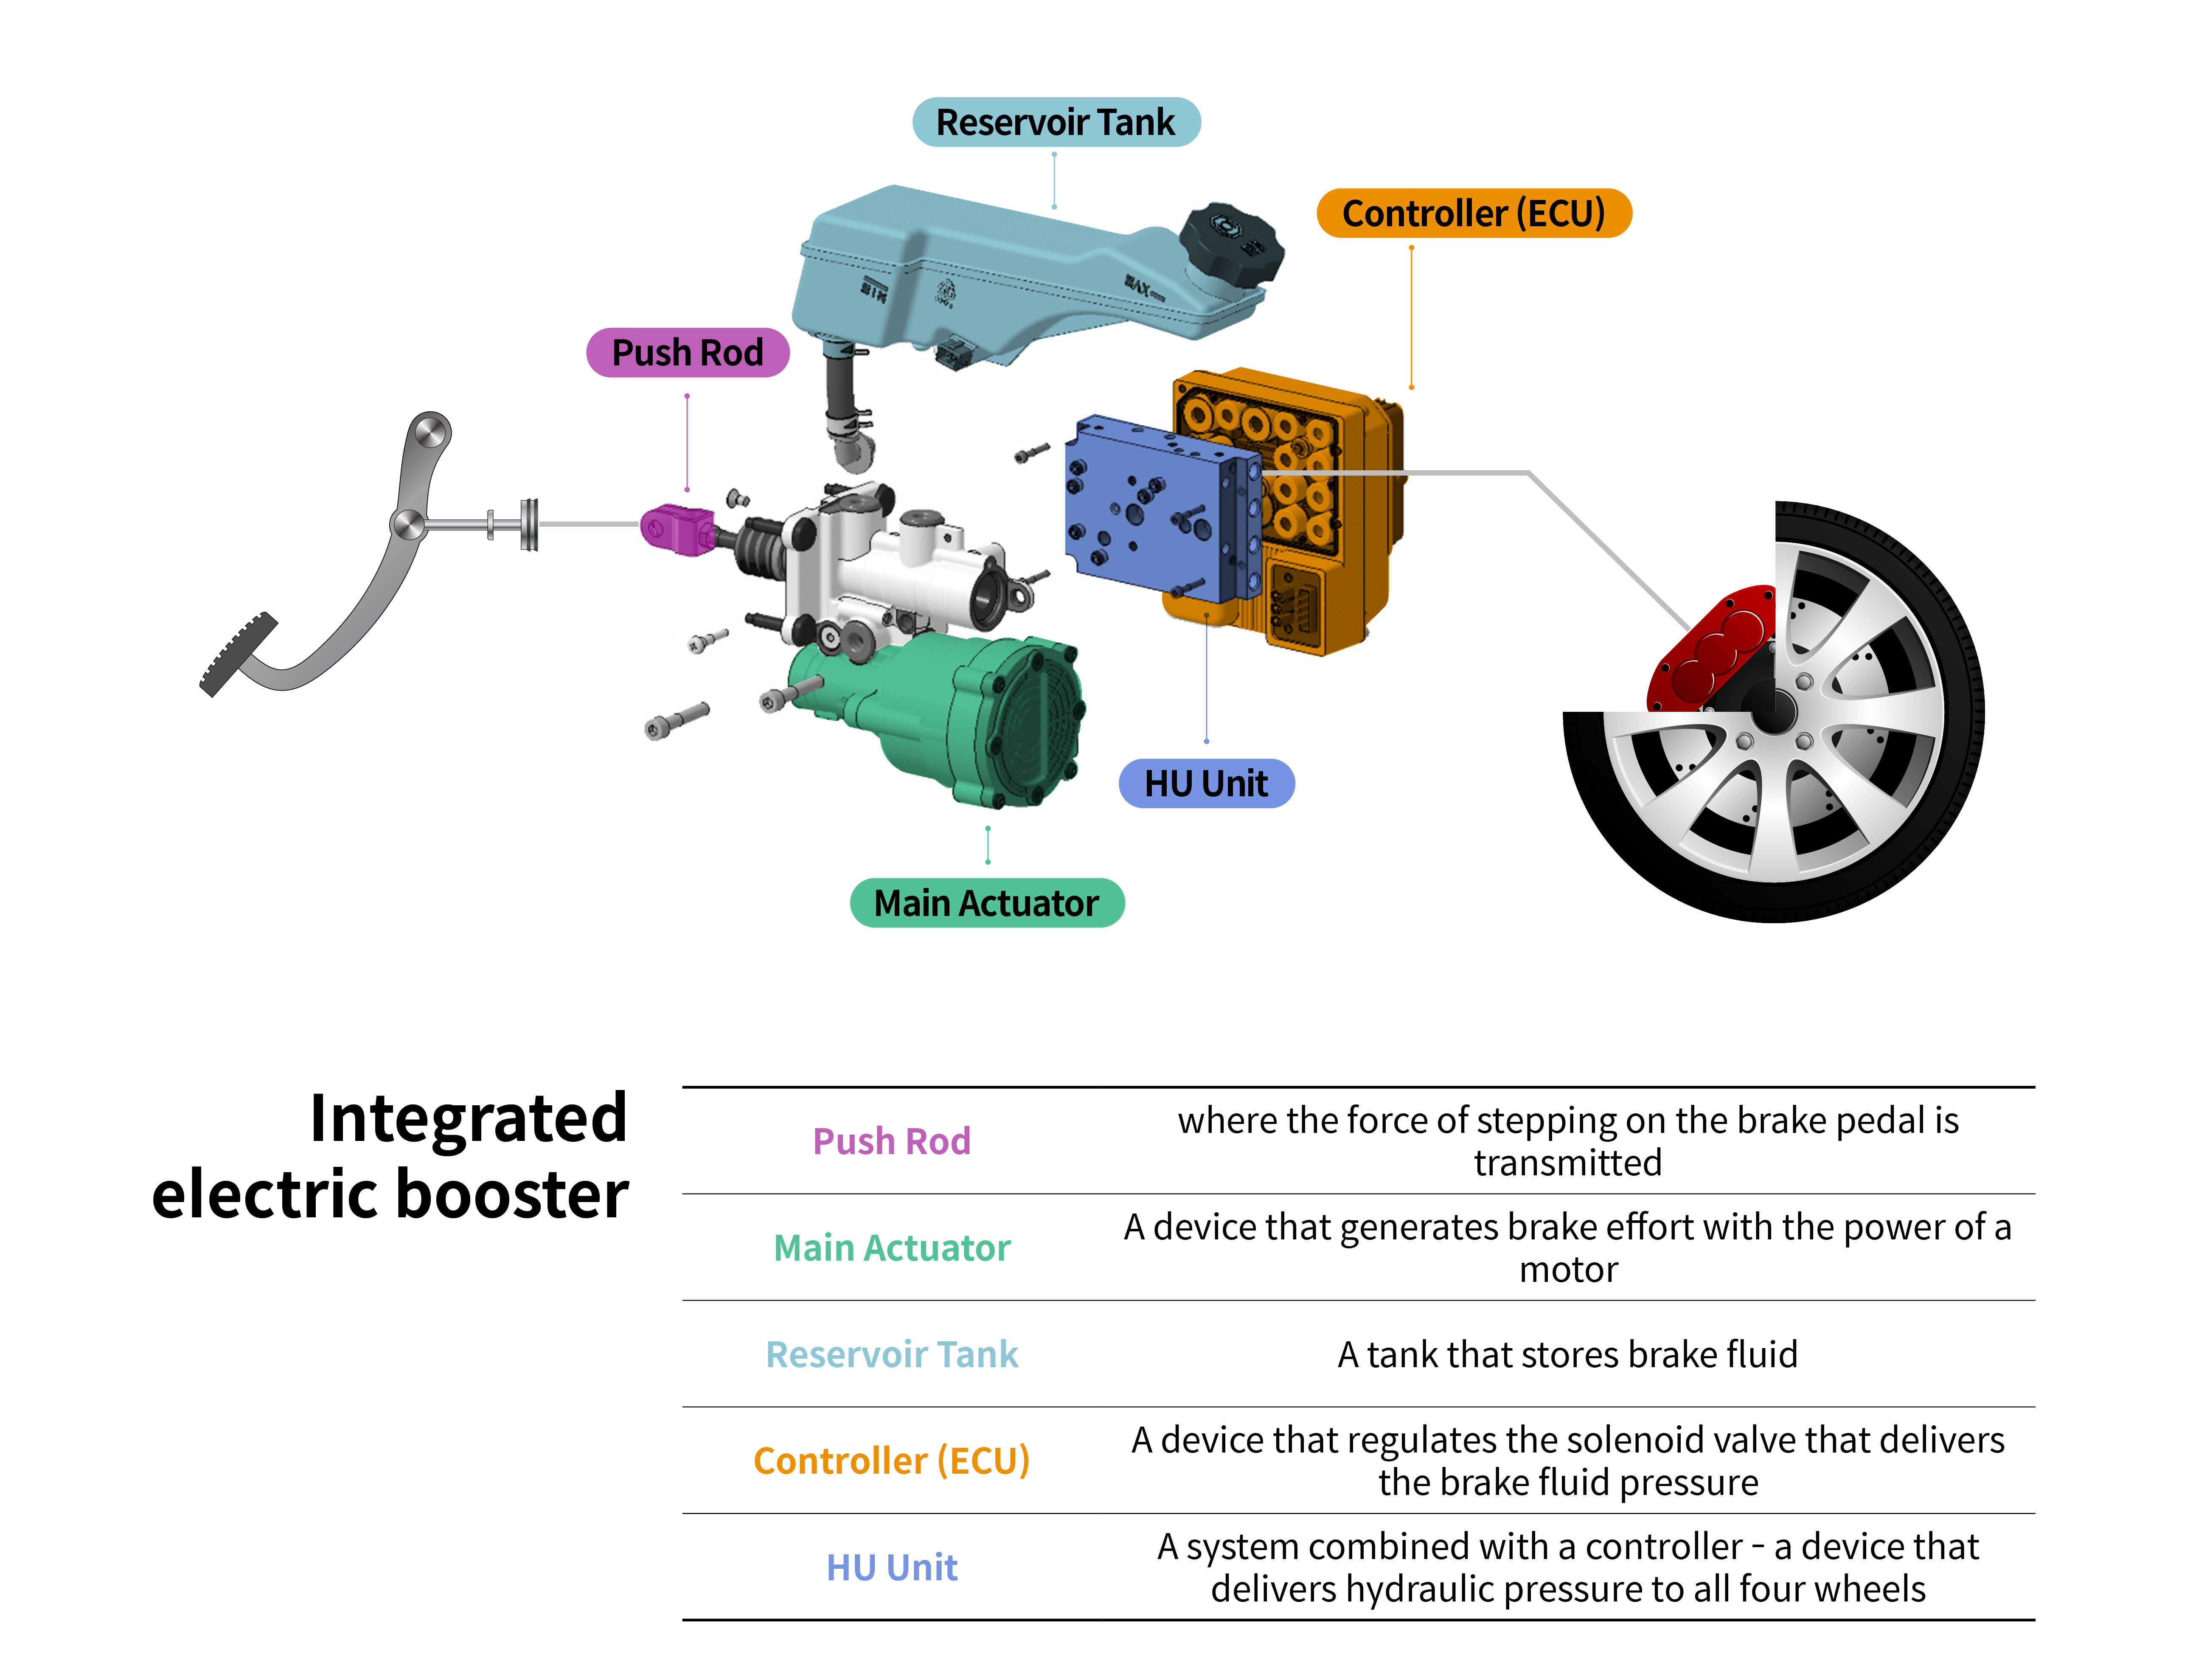 Infographic explaining the structure and operating principle of the integrated electric booster